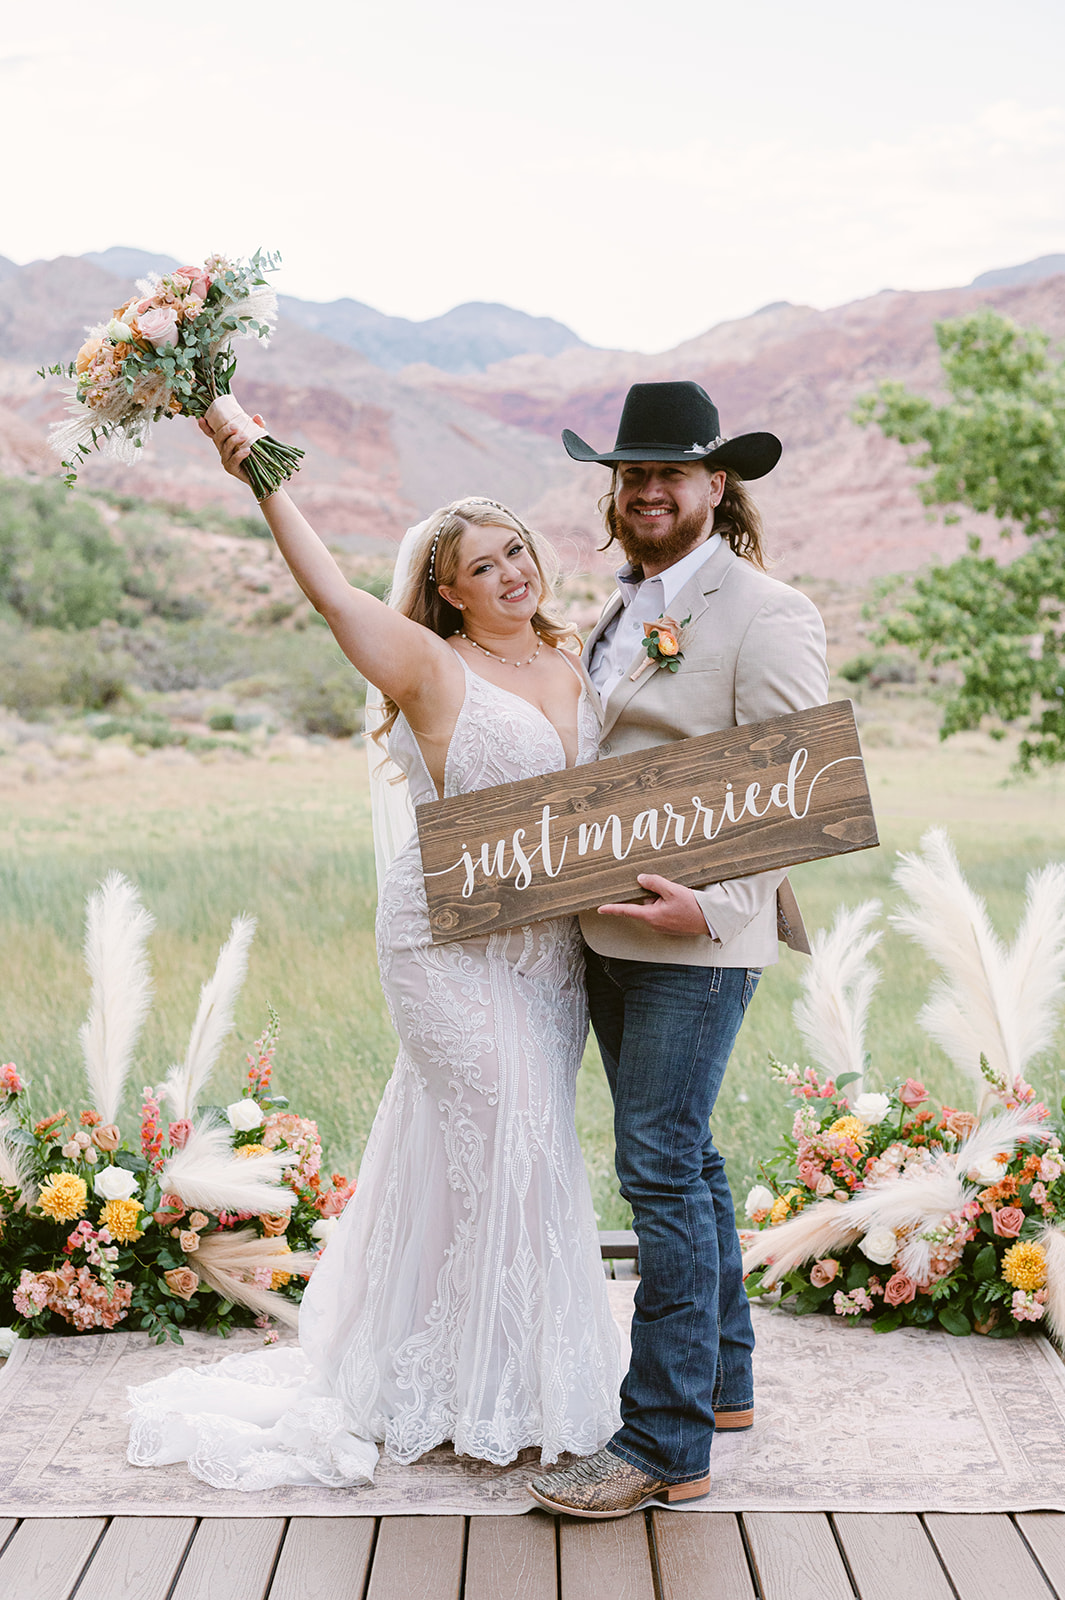 A couple who eloped in Red Rock Canyon Nevada celebrate in front of the red rock mountain backdrop and floral backdrop